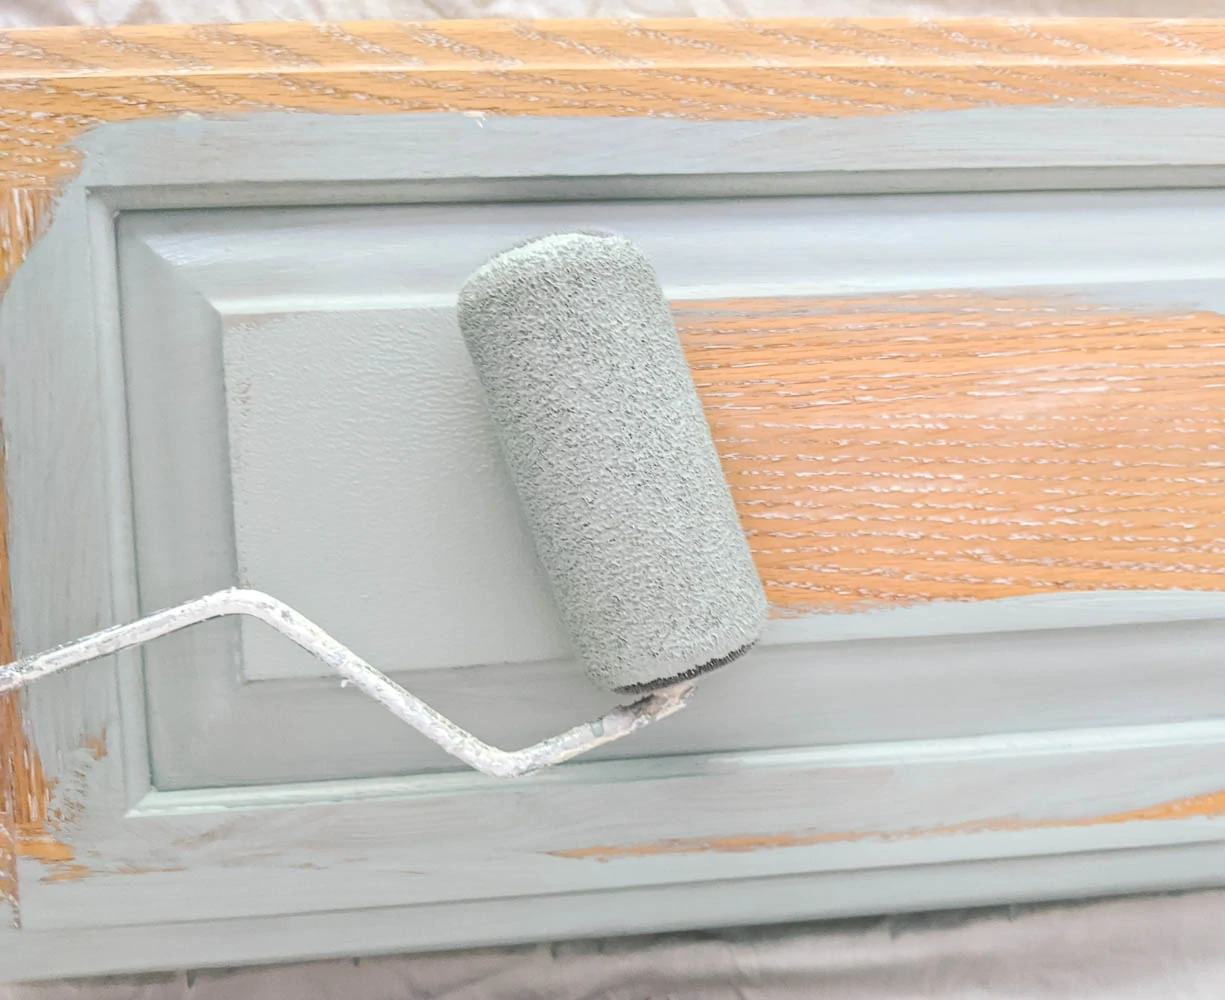 painting a cabinet door with a flocked paint roller and blue paint.